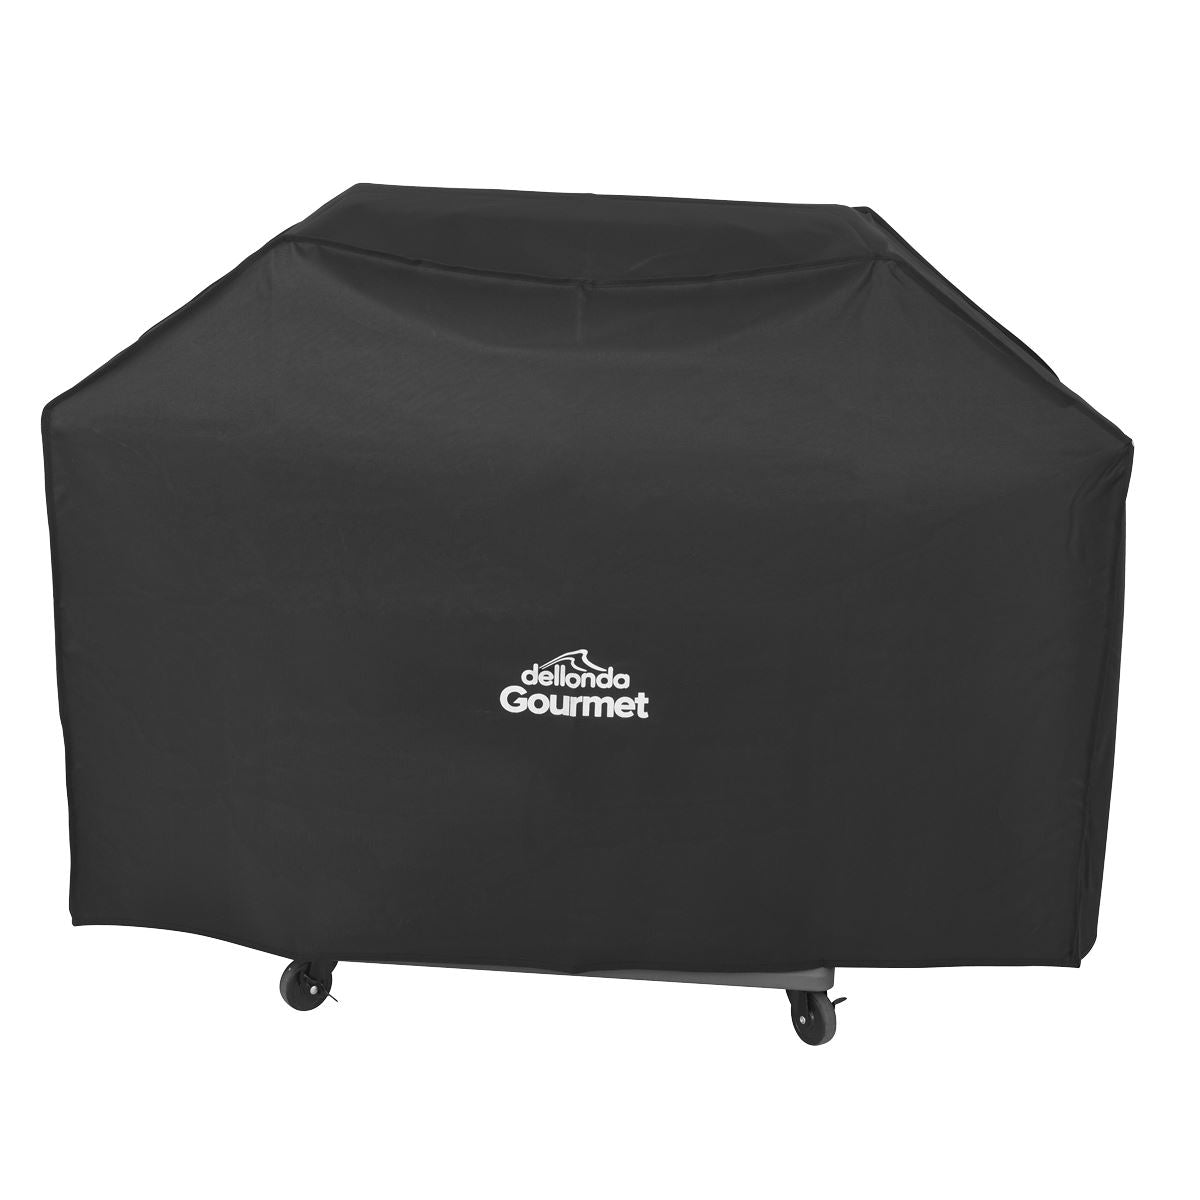 Dellonda Deluxe Oxford Style Water-Resistant Cover for BBQs, 1370 x 920mm